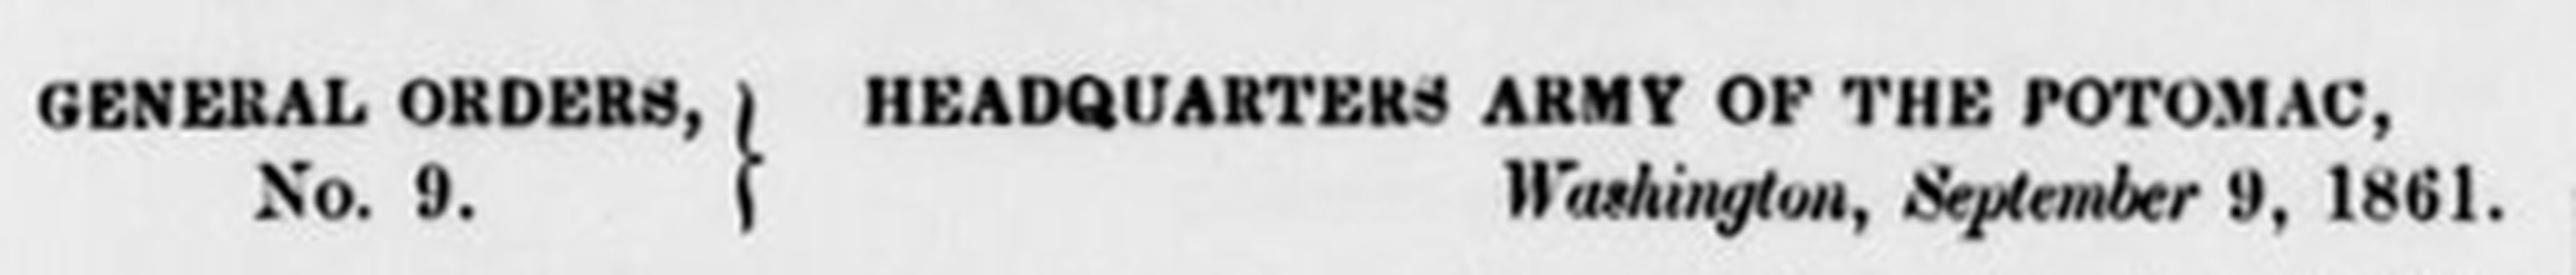 G. O. # 9 Fort Woodbury Sept. 9, 1861(a)